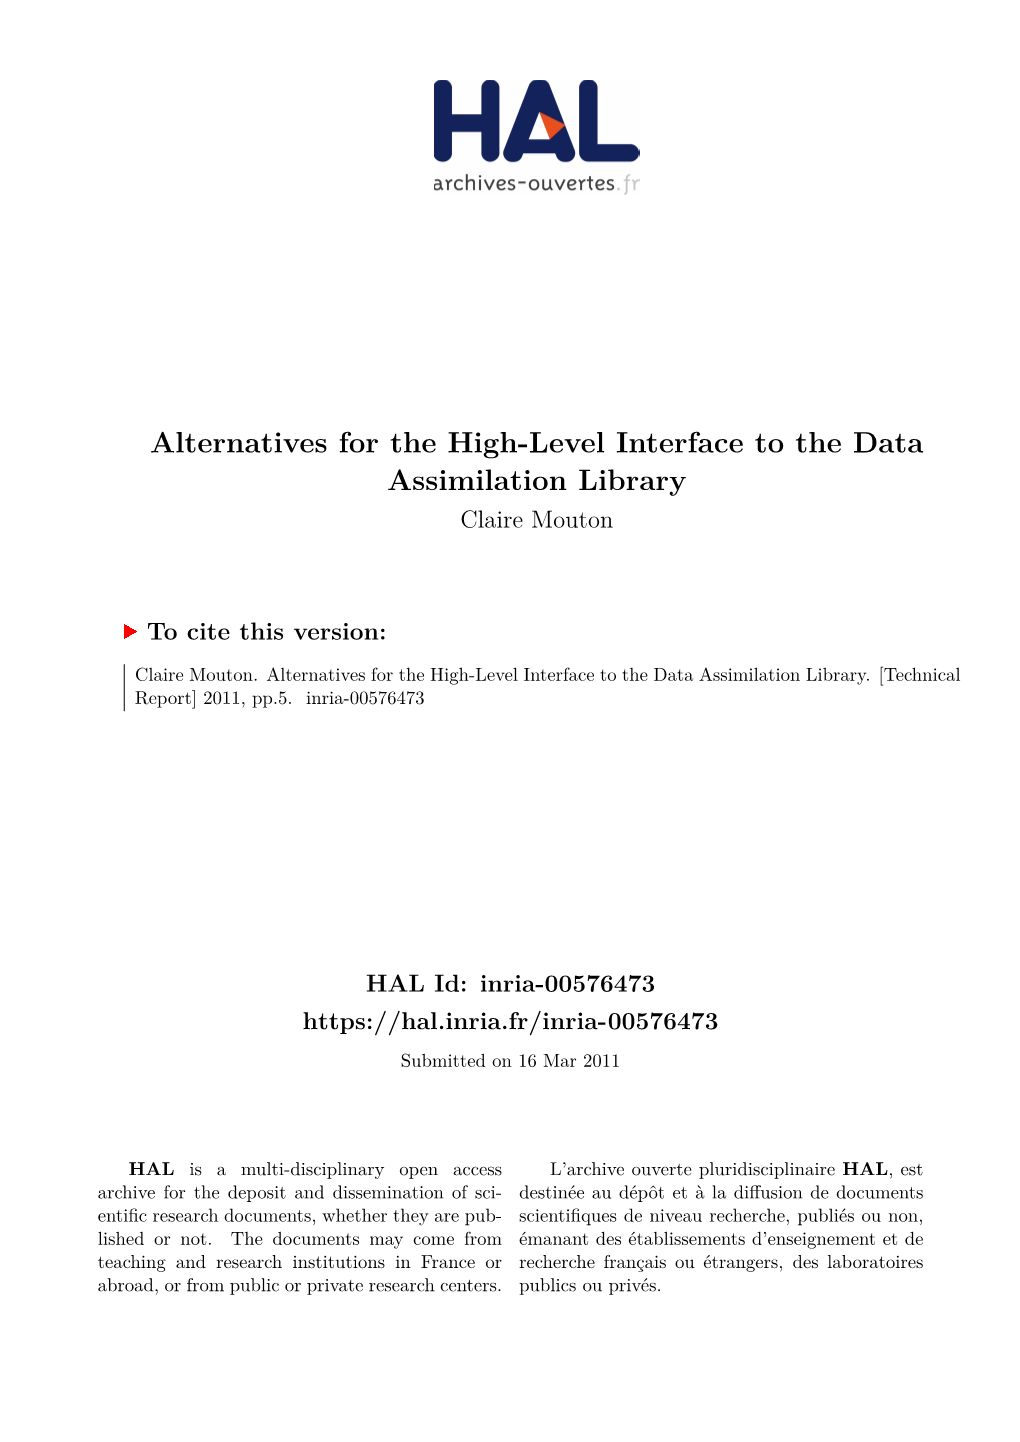 Alternatives for the High-Level Interface to the Data Assimilation Library Claire Mouton